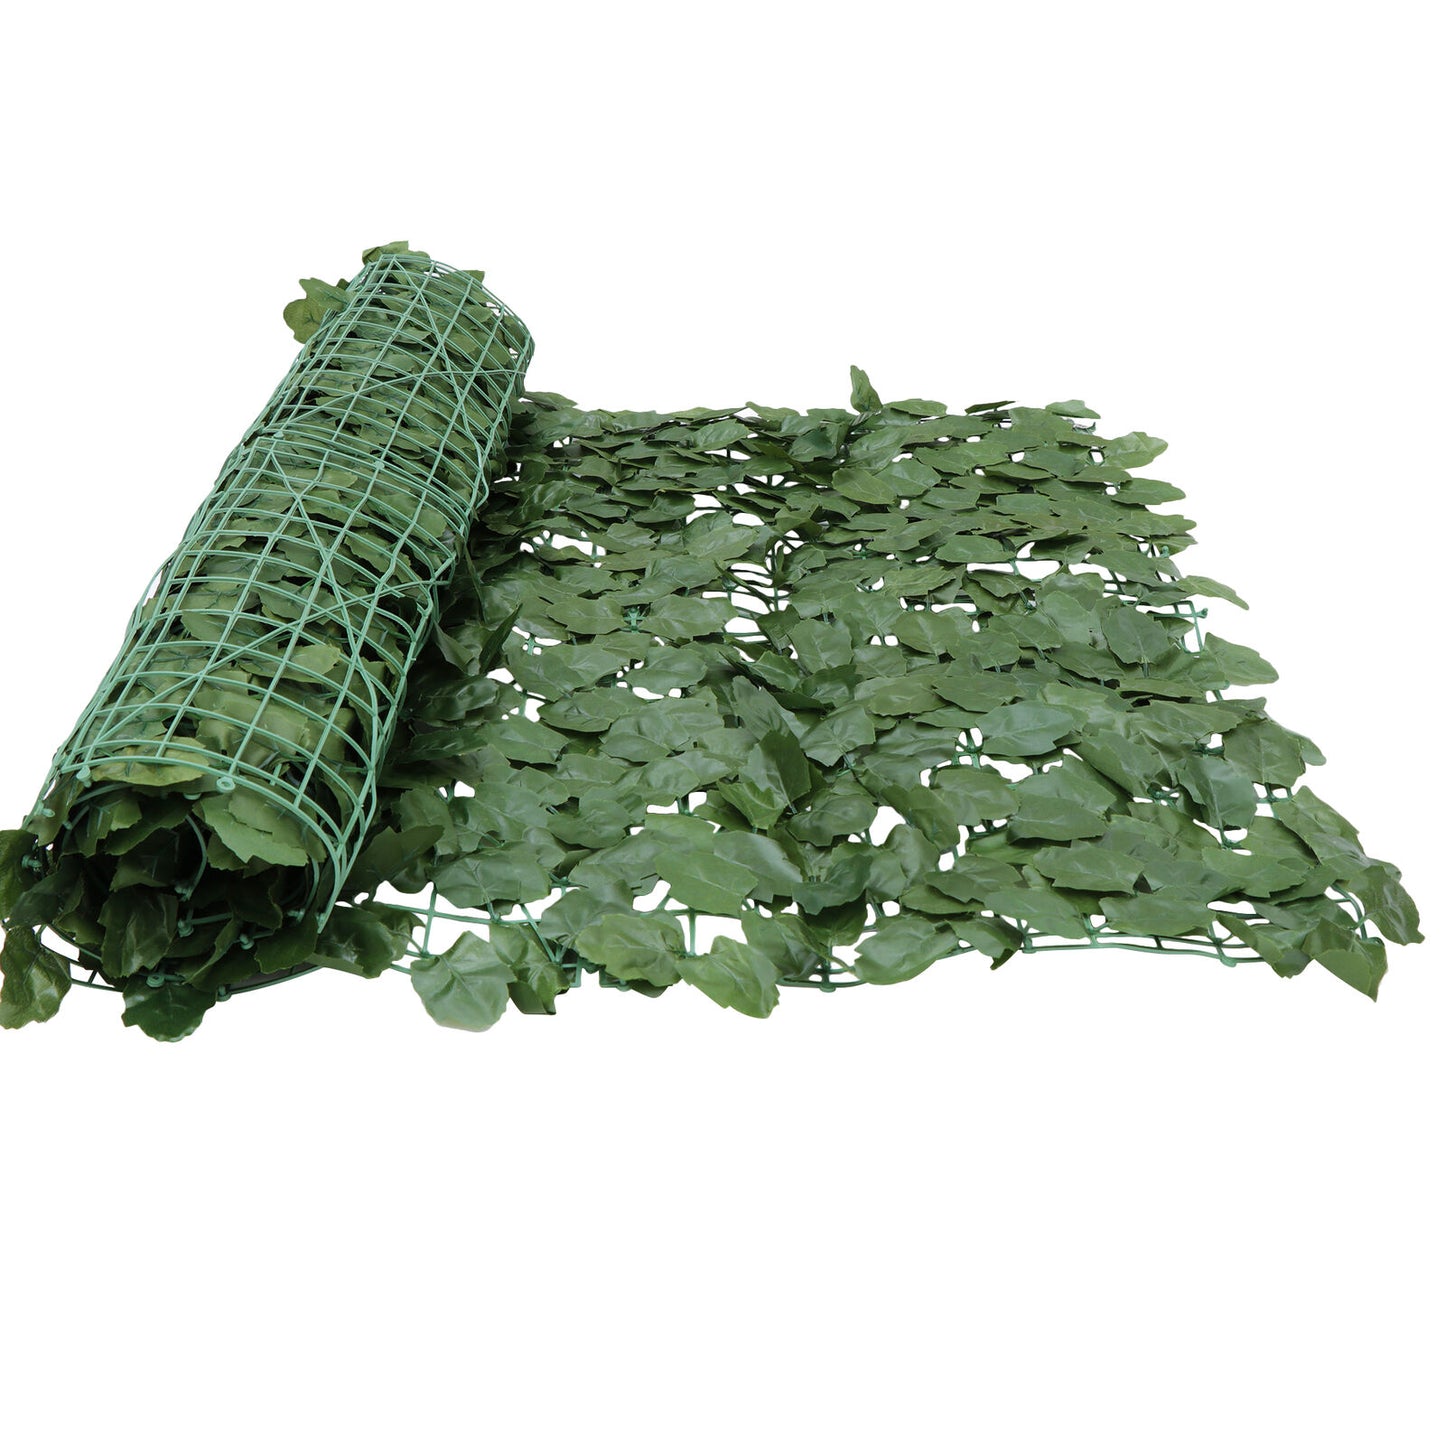 98" X 59" Natural Decorative Double Side Artificial Ivy Privacy Fencing Screen